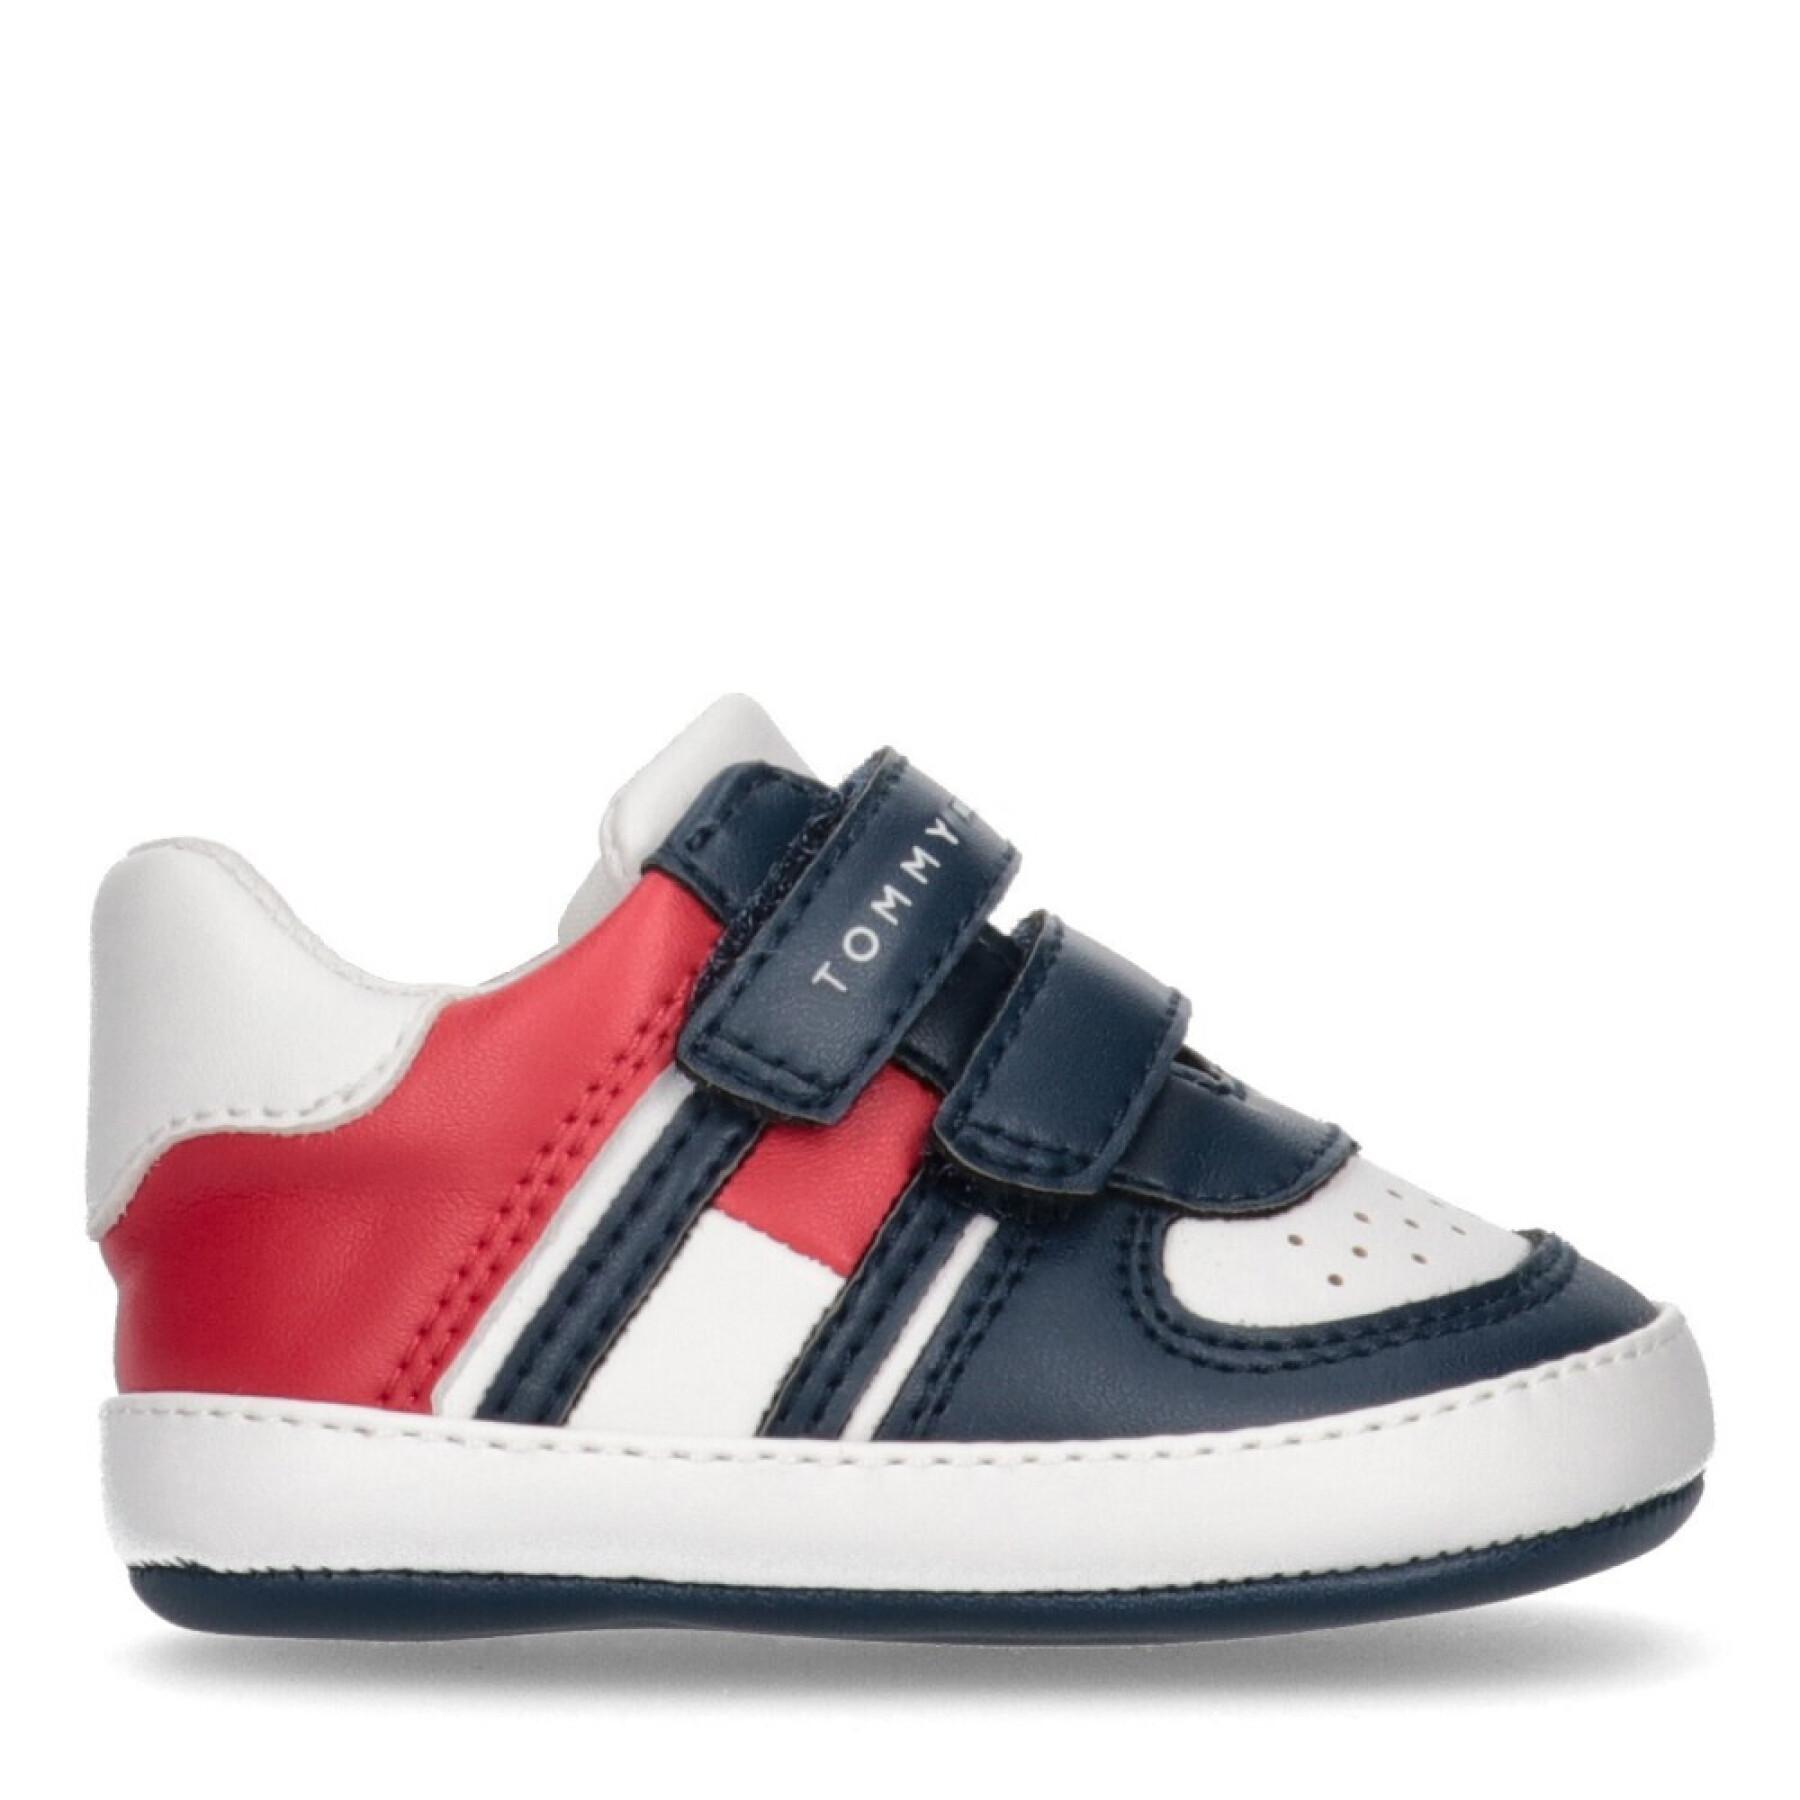 Low velcro baby girl sneakers Tommy Hilfiger Blue/White/Red